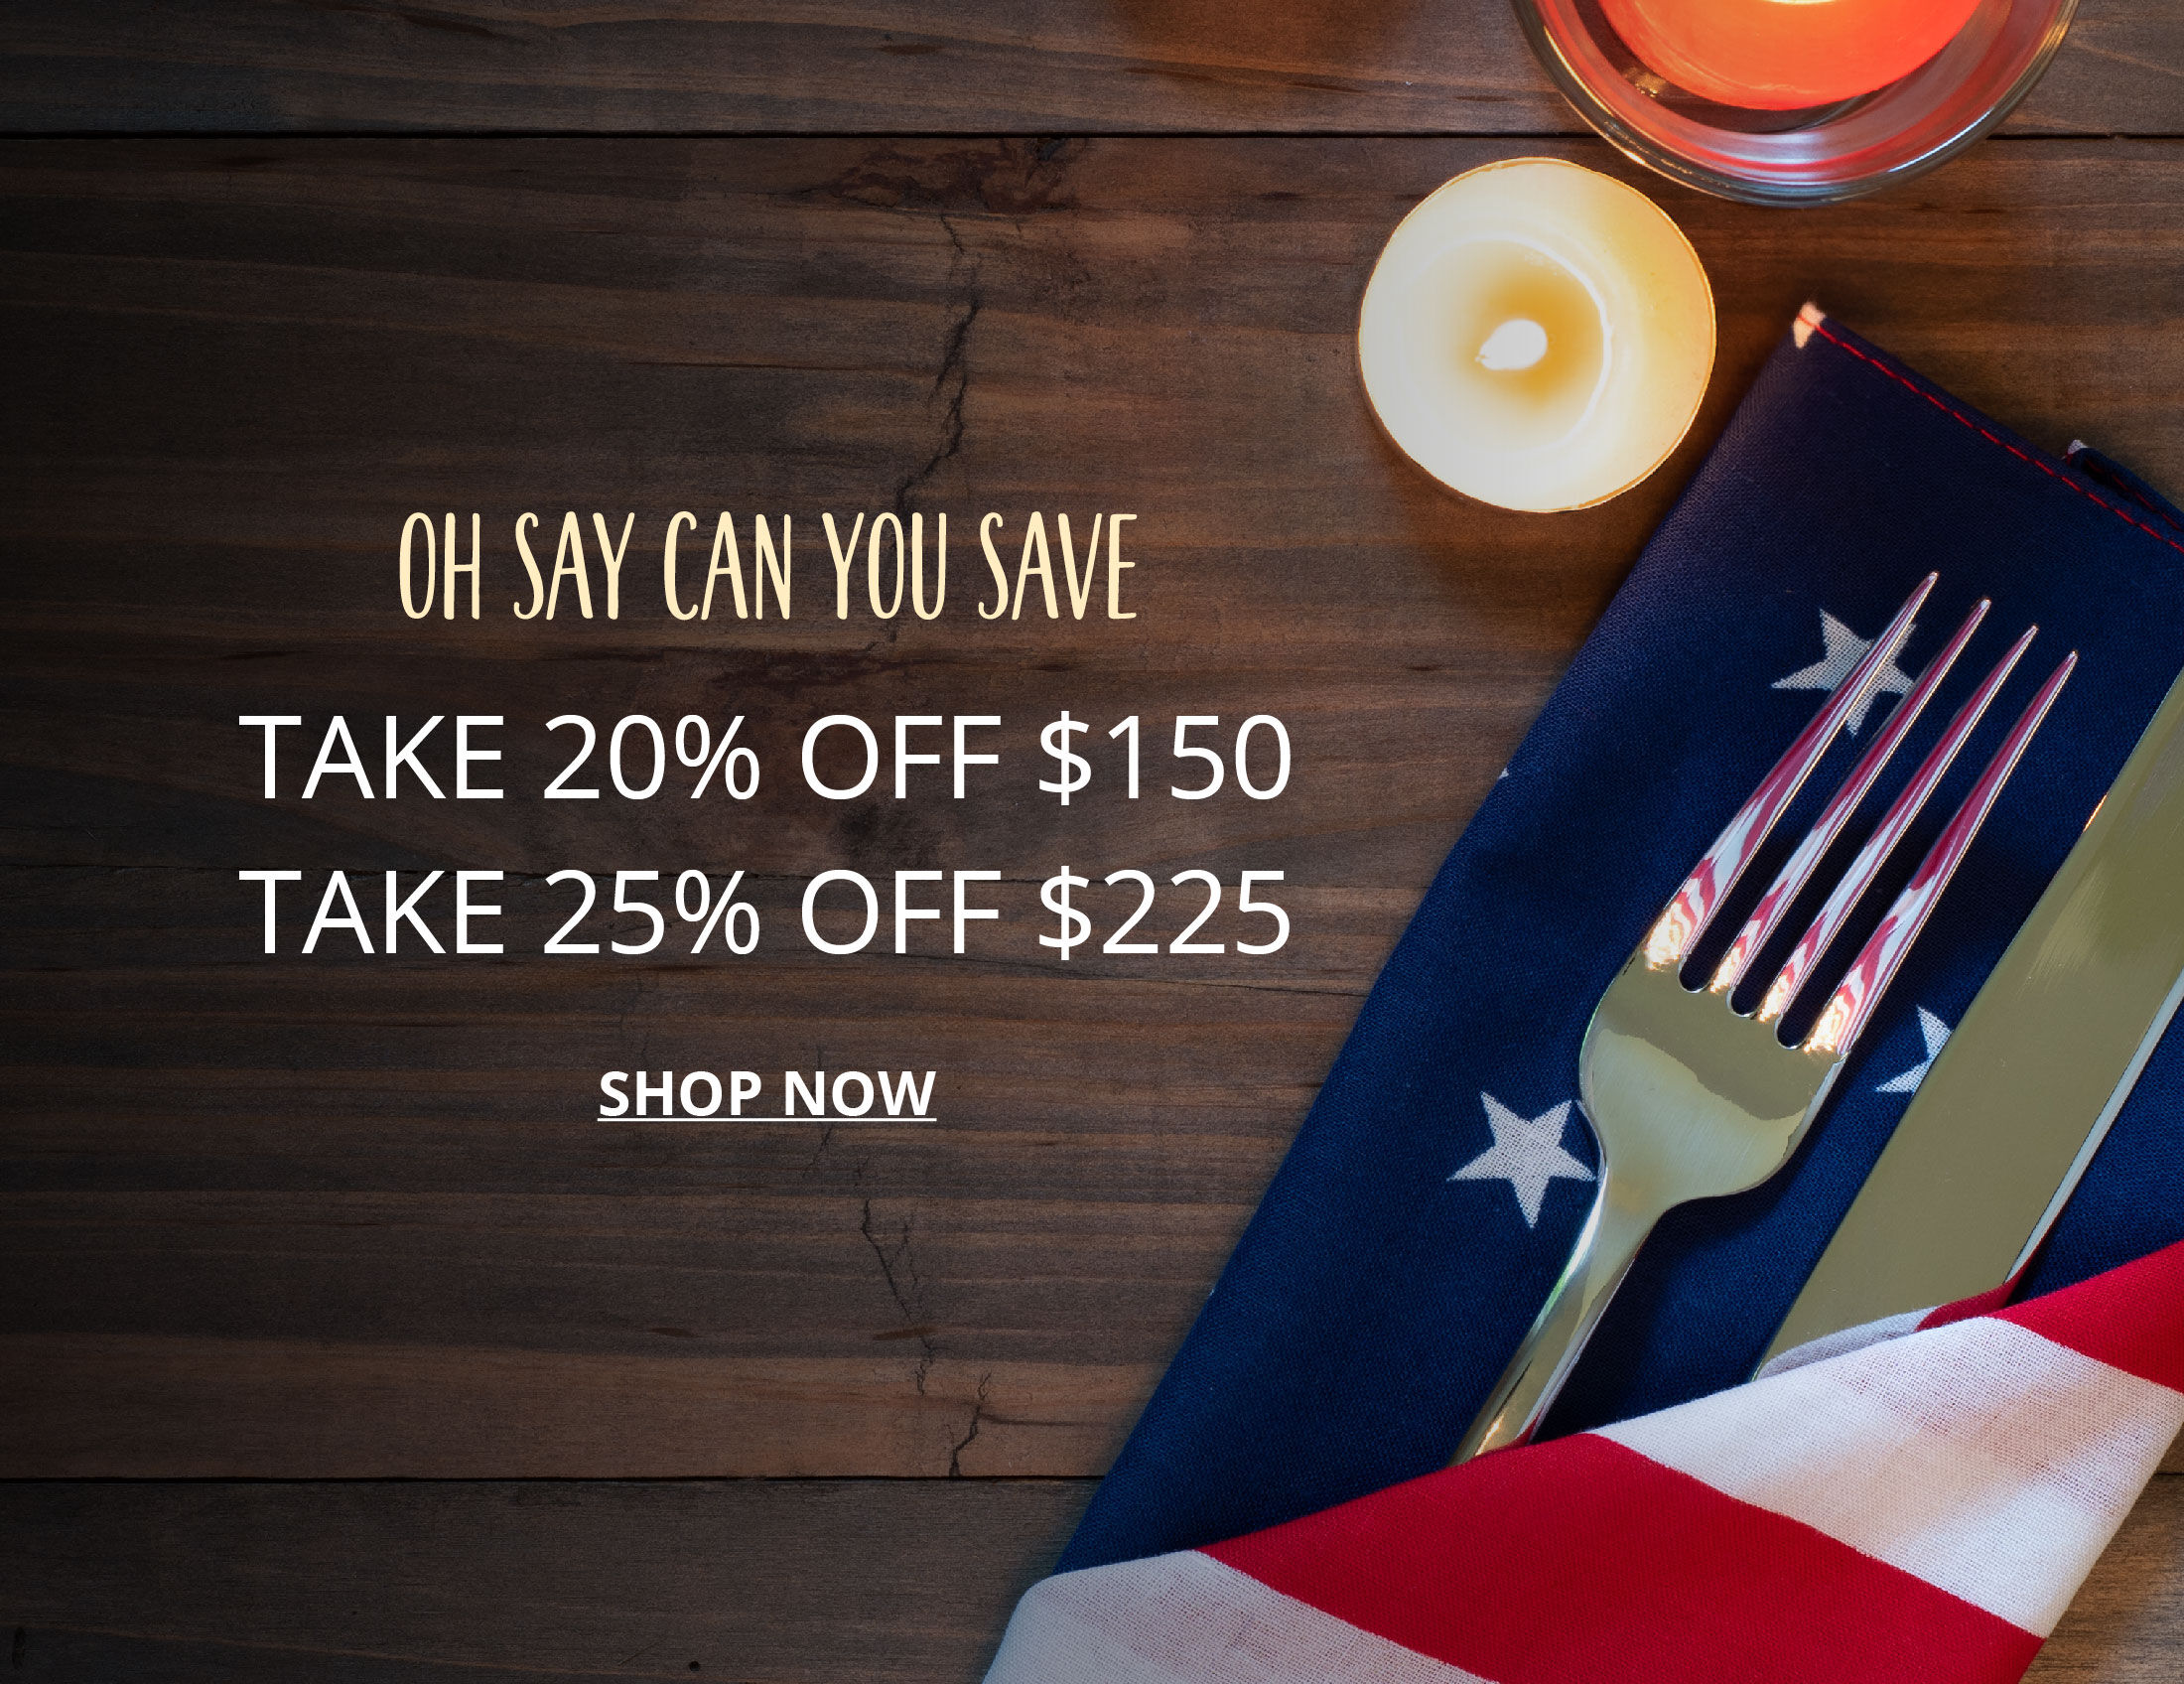 Buy More, Save More: 20% OFF $150, 25% OFF $225